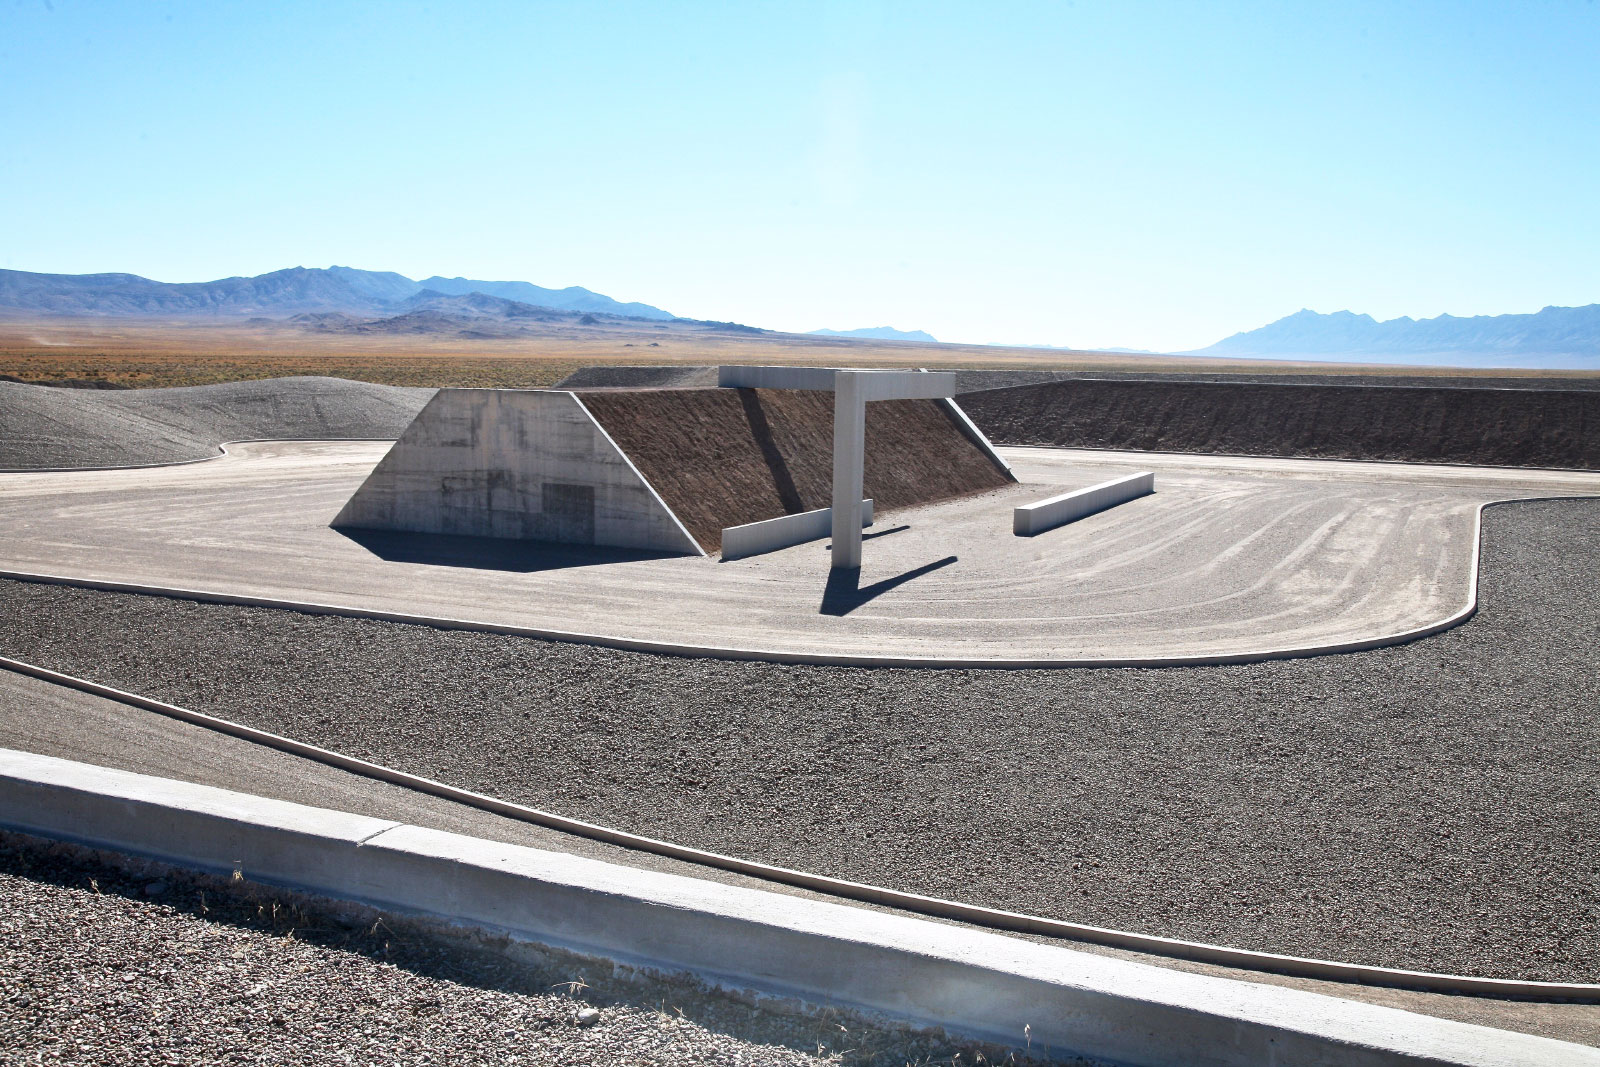 a trapezoidal prism made of stone stands on a desert landscape